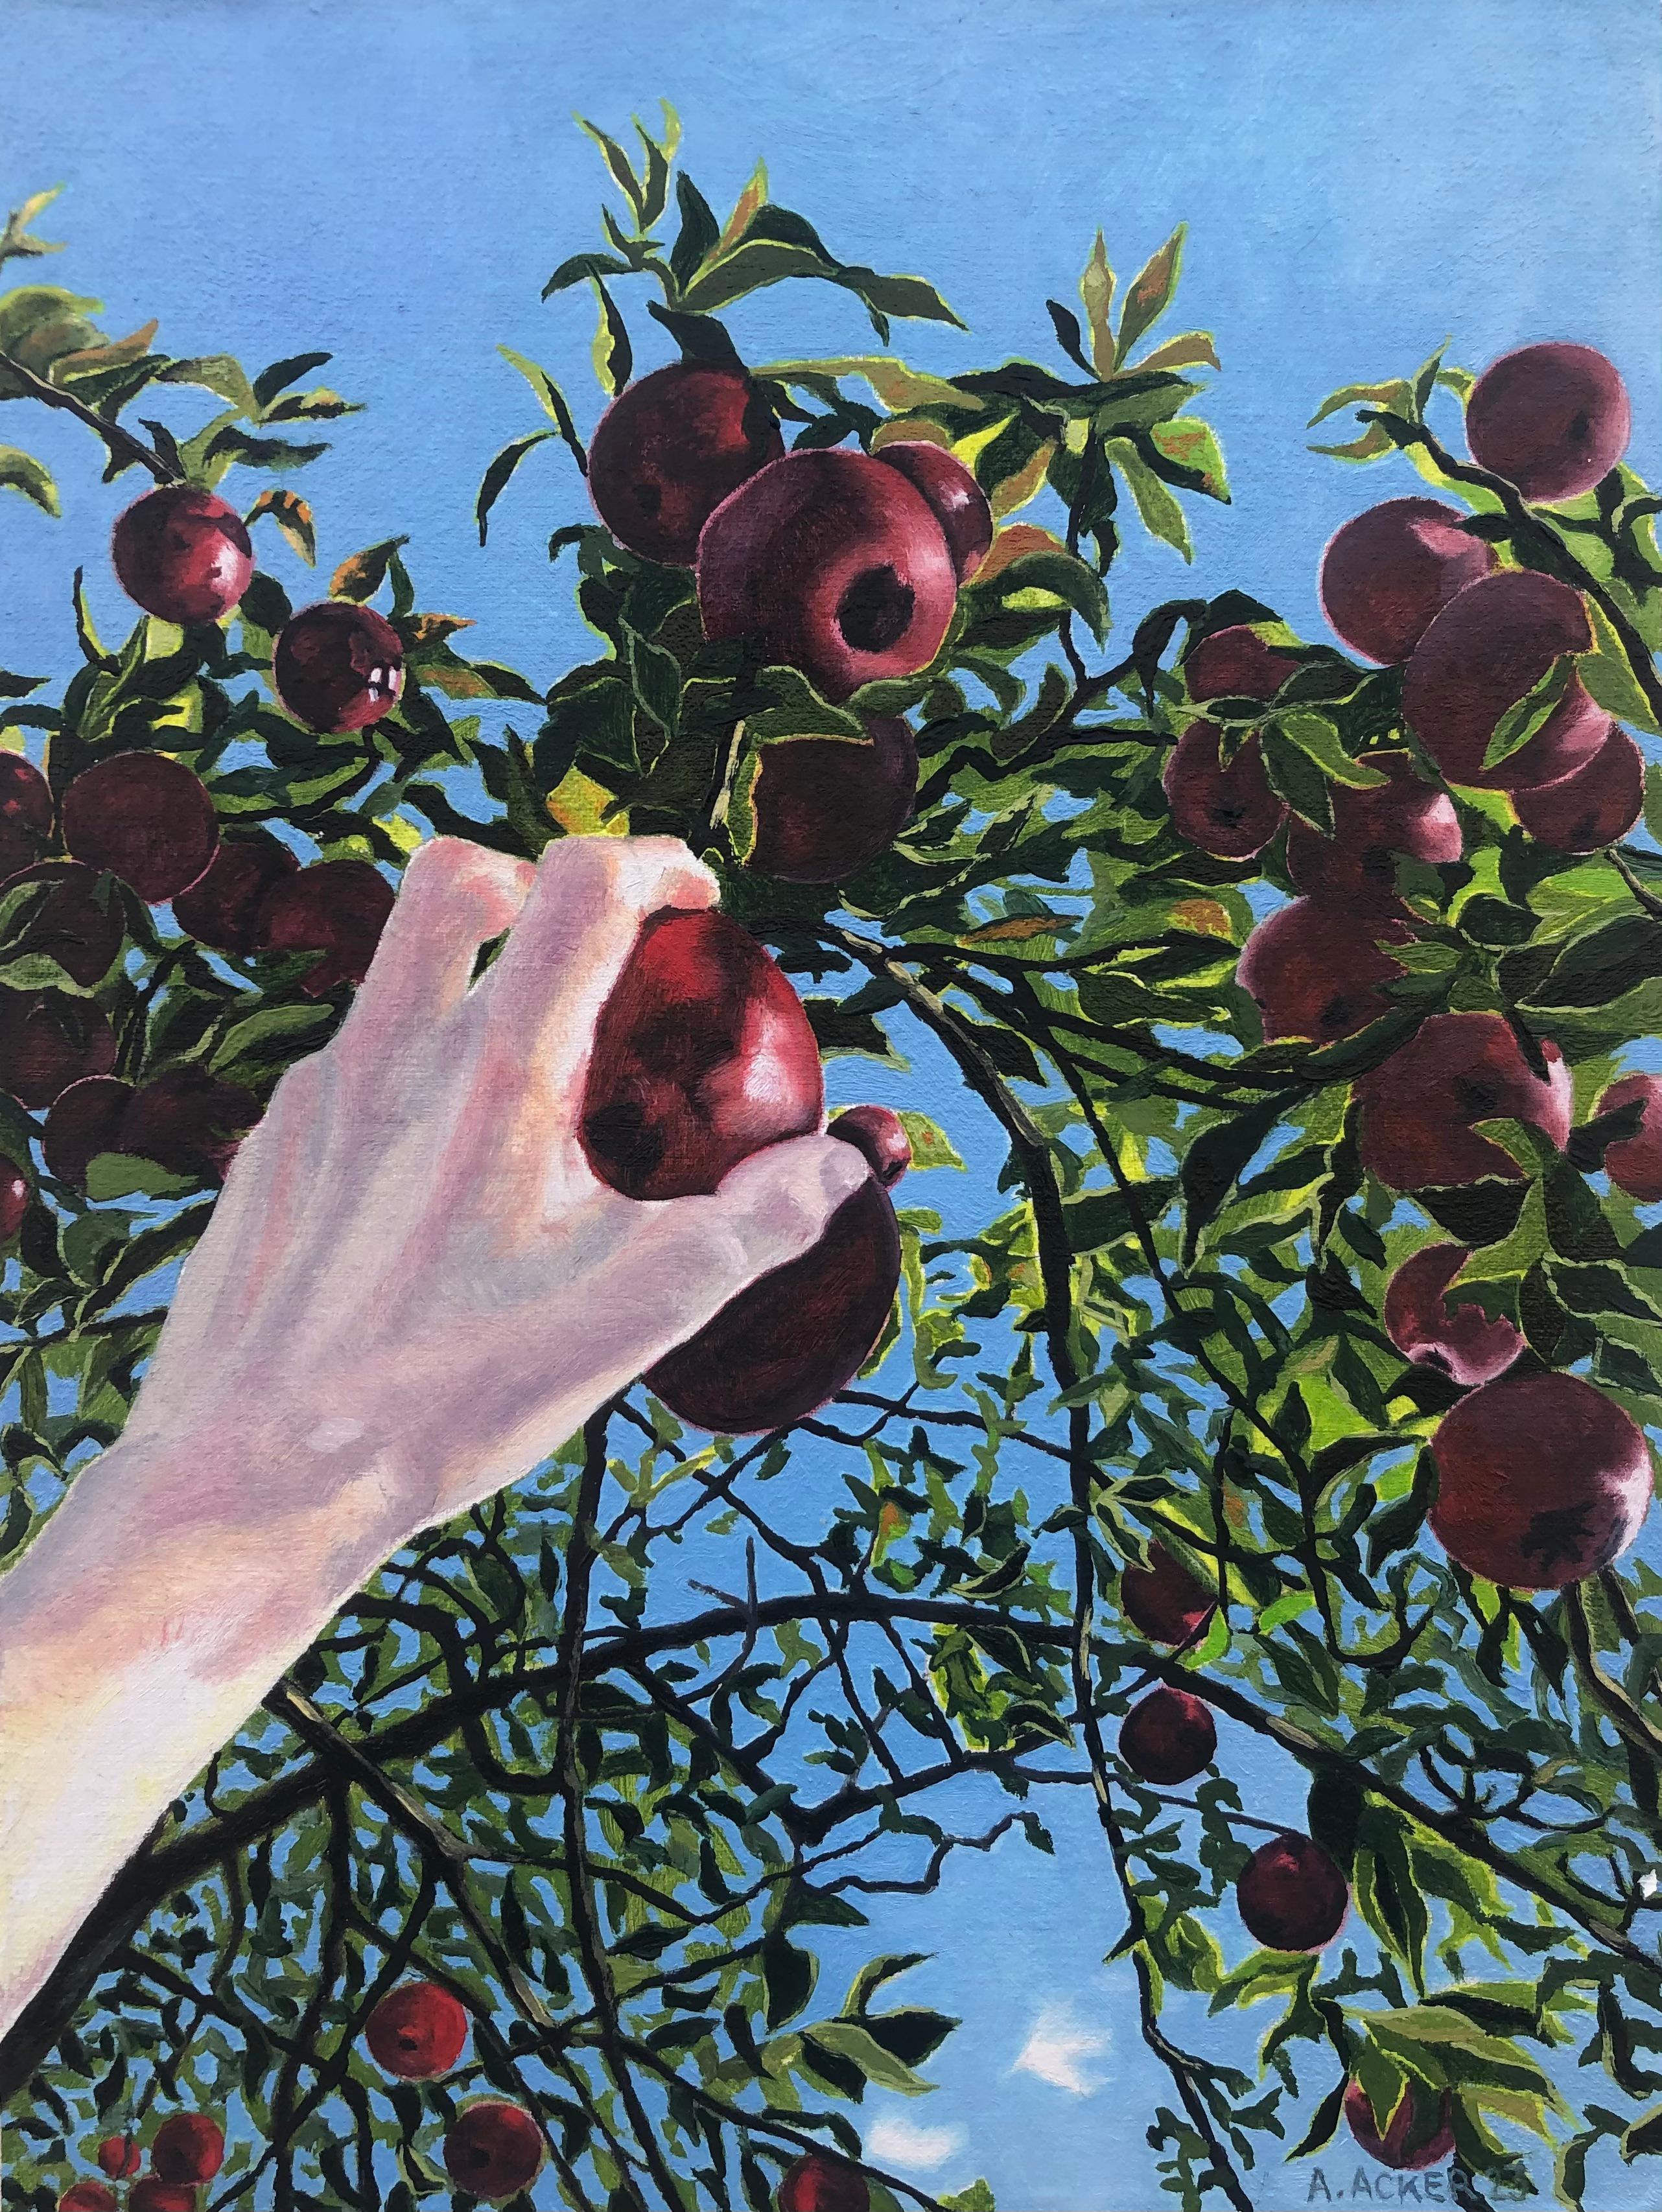 Amanda Acker Landscape Painting - Apple Picking, Hand Reaching for Red Fruit, Green Leaves, Tree, Blue Sky, Fall